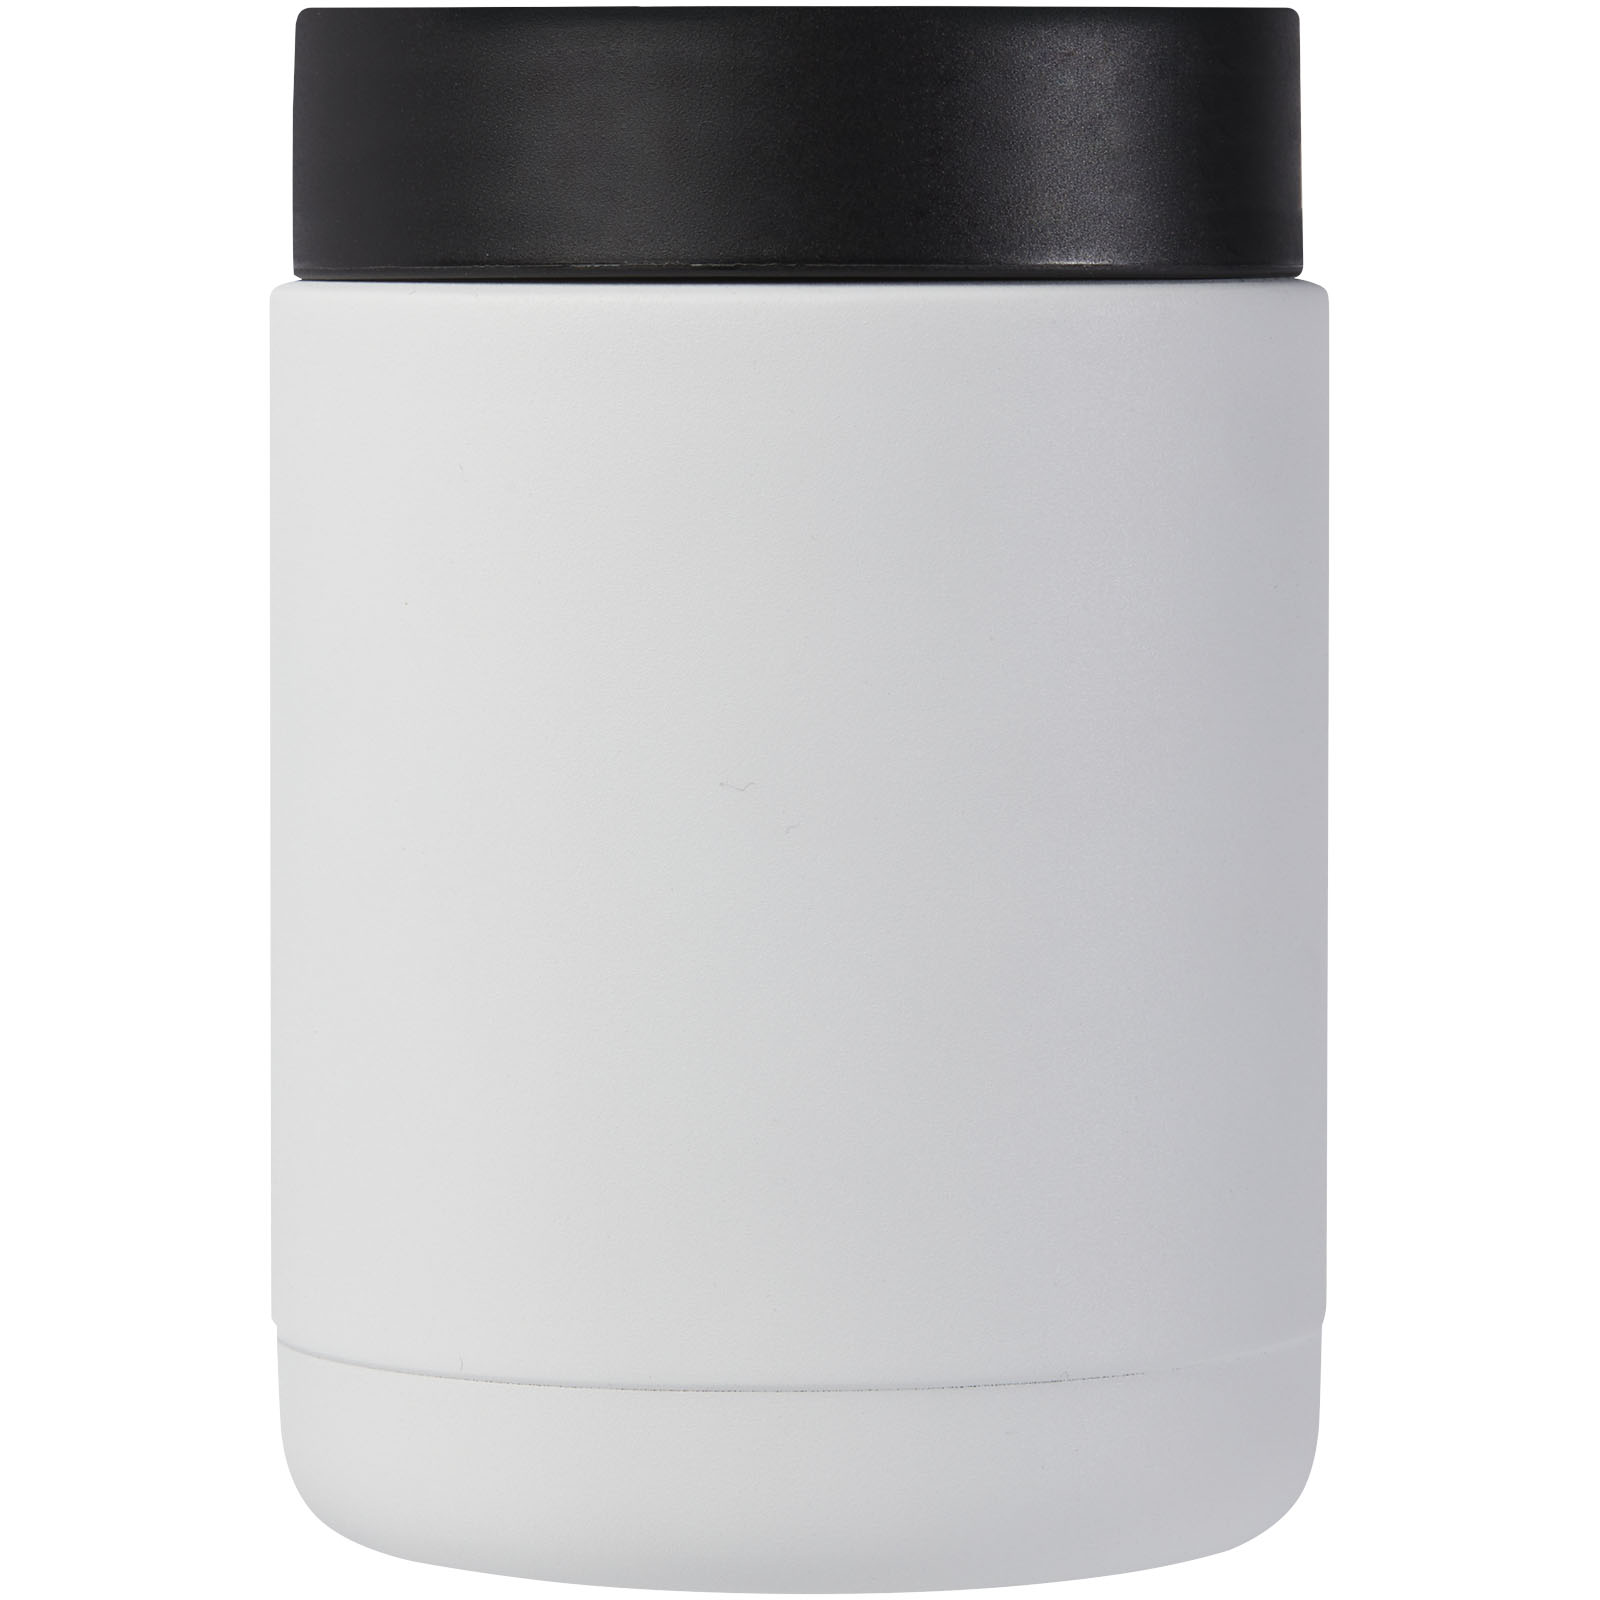 Advertising Lunch Boxes - Doveron 500 ml recycled stainless steel insulated lunch pot - 3